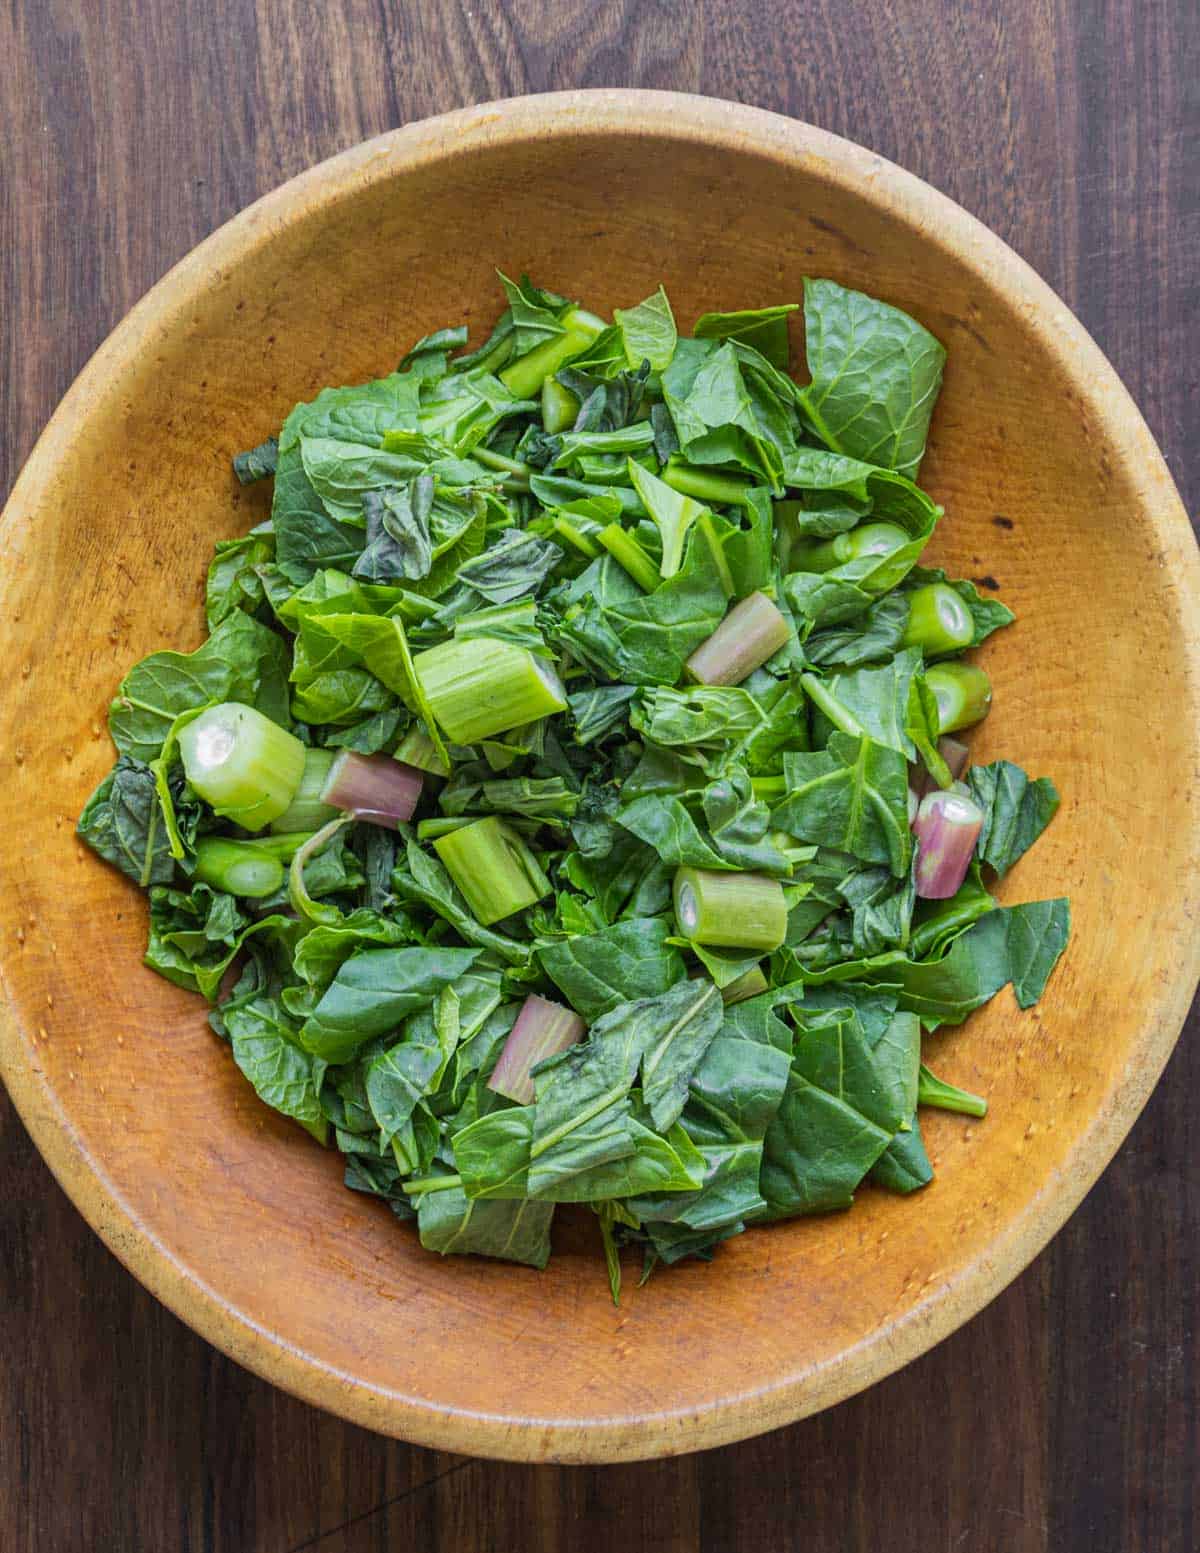 A bowl of cut up poke greens and stems.